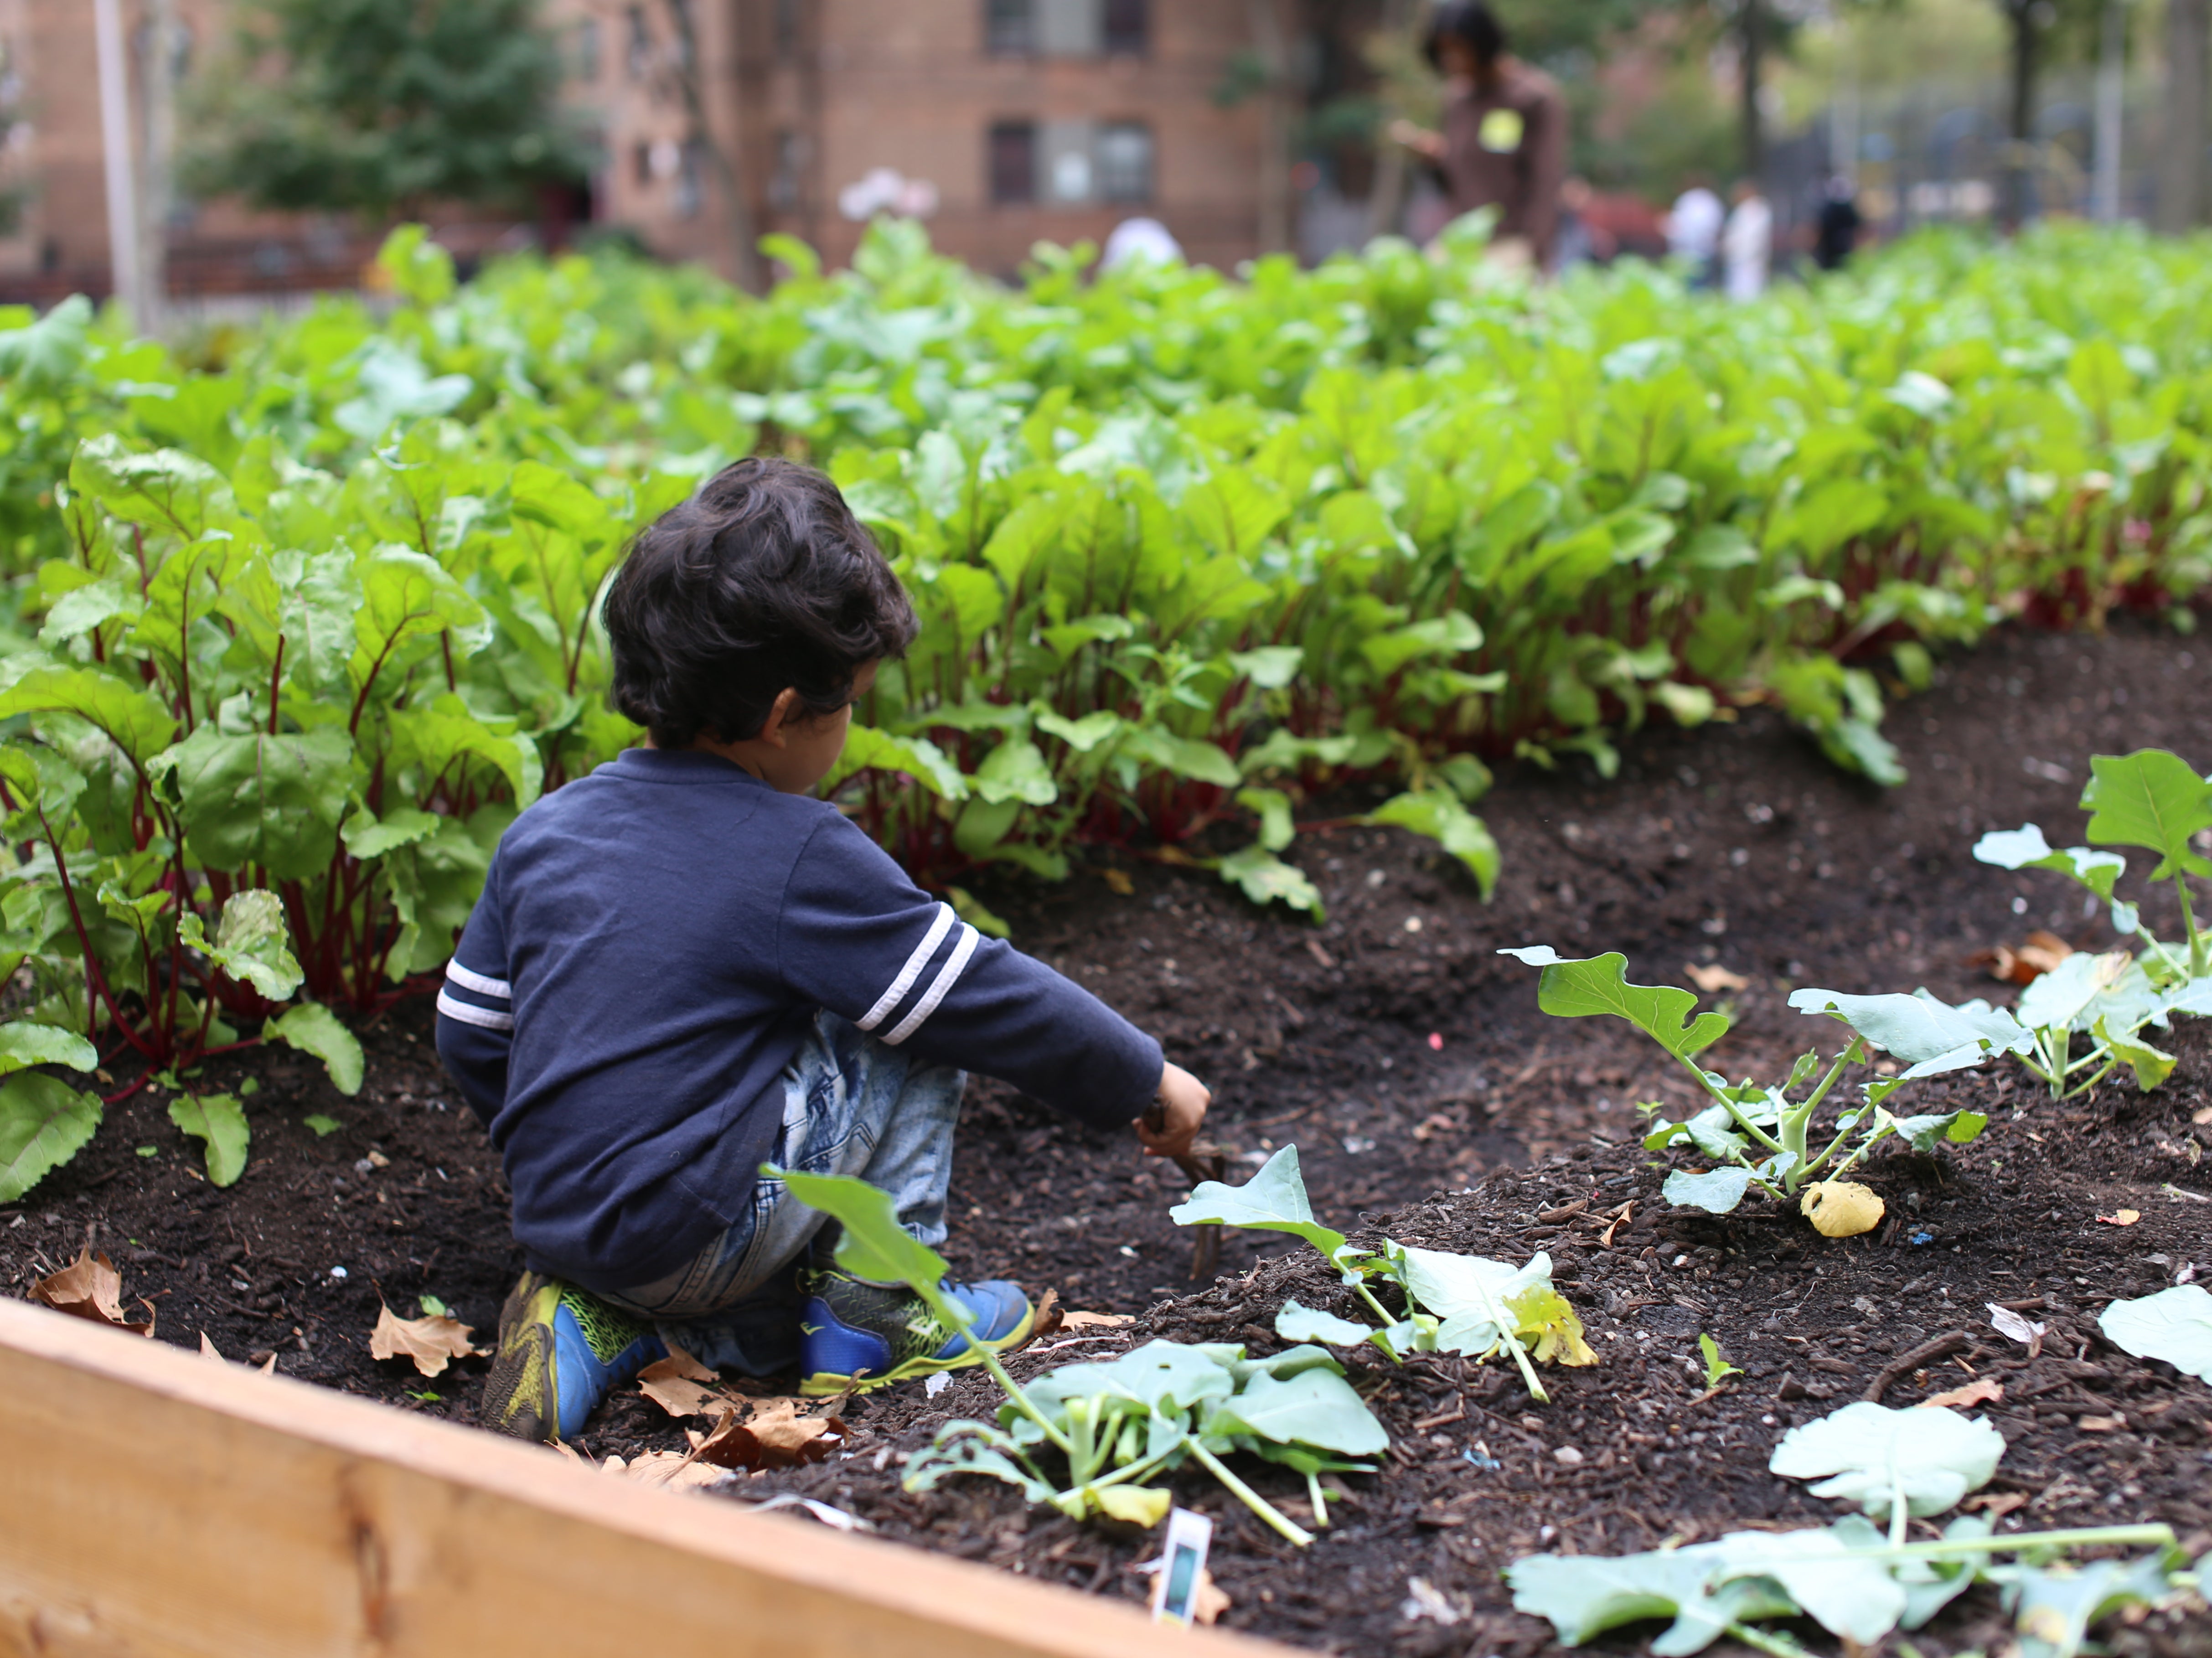 A child works on a raised plant bed at Harlem Grown